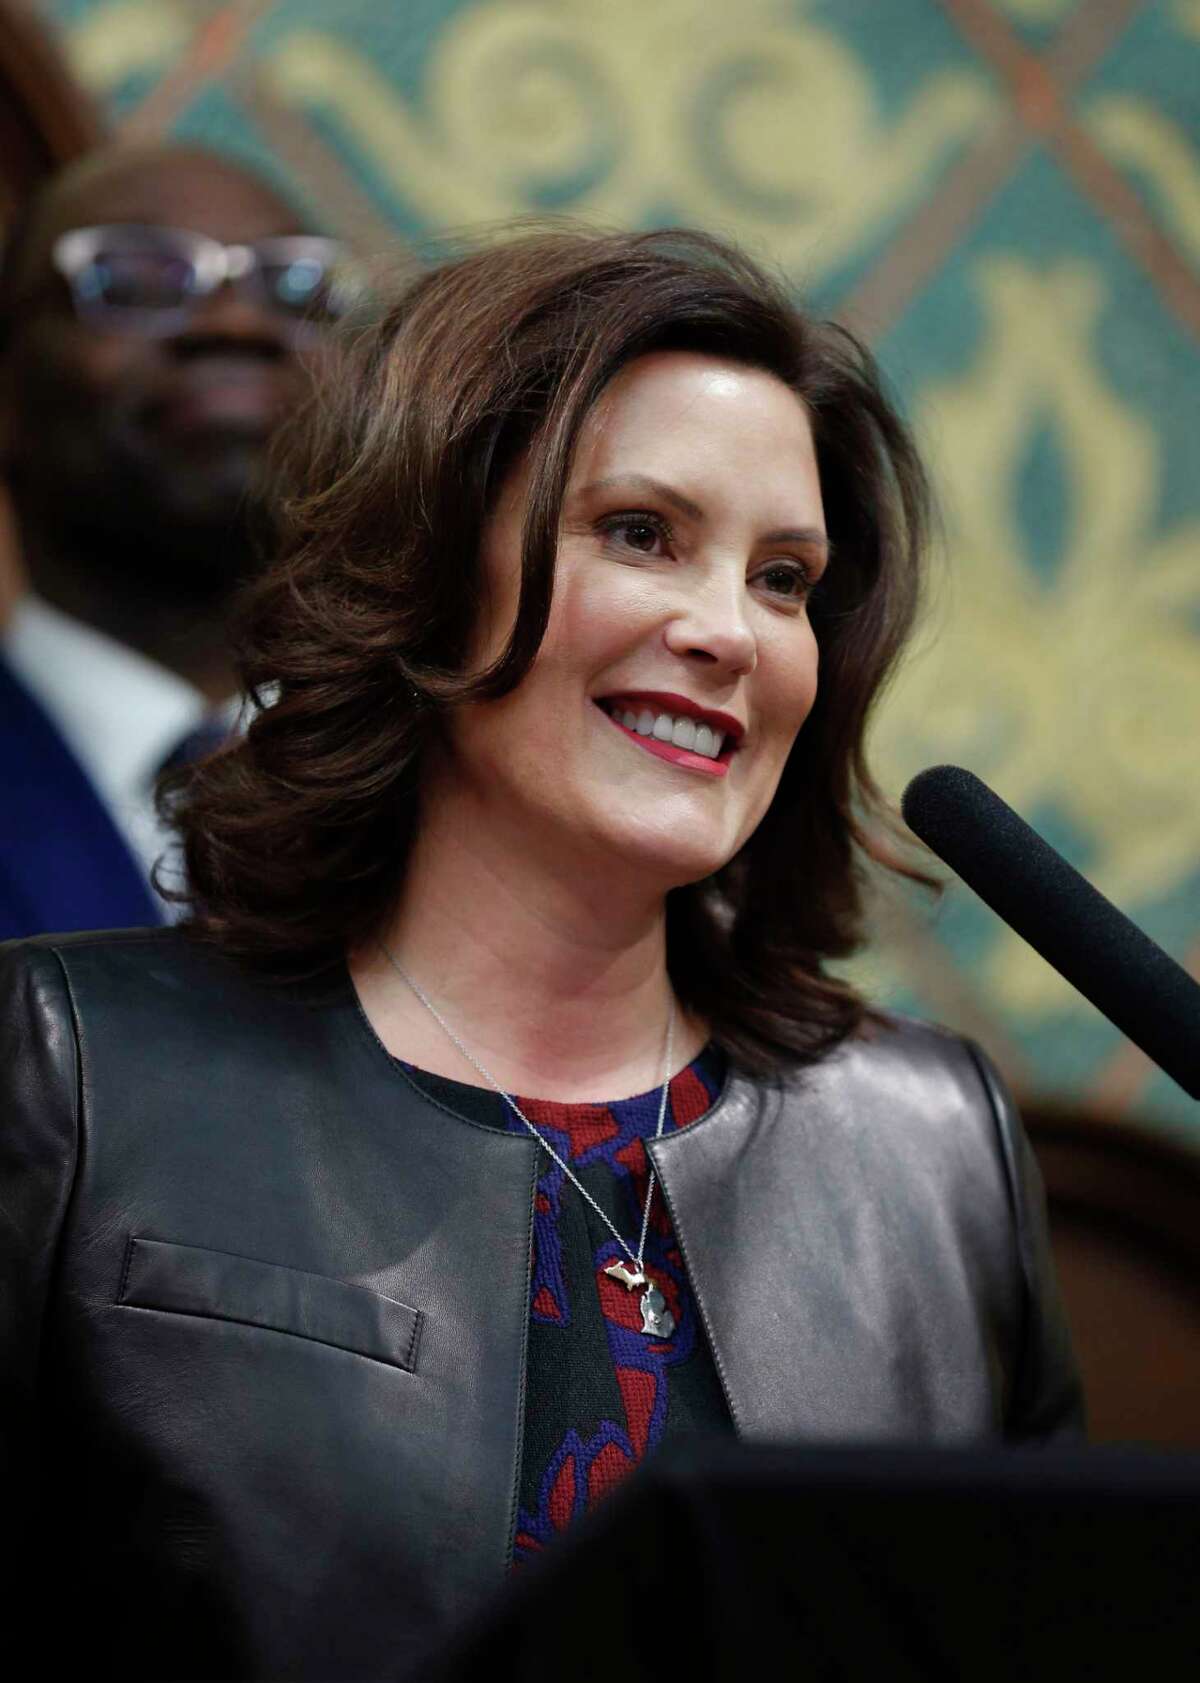 Michigan Gov. Gretchen Whitmer delivers her State of the State address to a joint session of the House and Senate, Wednesday, Jan. 29, 2020, at the Michigan State Capitol in Lansing, Mich.